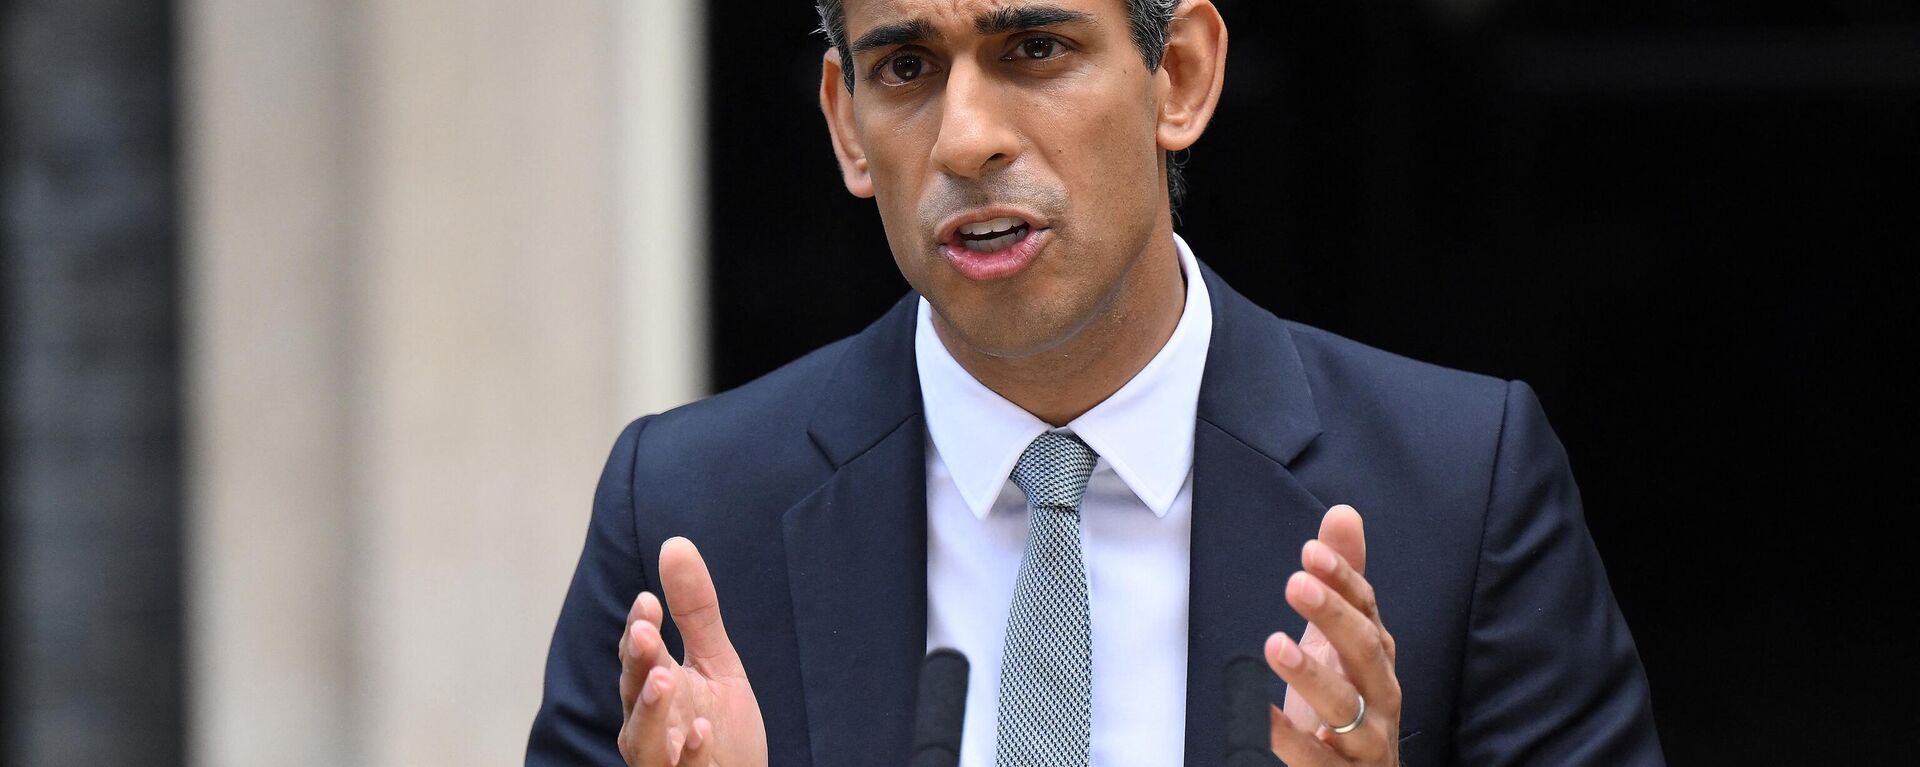 Britain's newly appointed Prime Minister Rishi Sunak delivers a speech outside 10 Downing Street in central London, on October 25, 2022. - Sputnik International, 1920, 05.11.2022